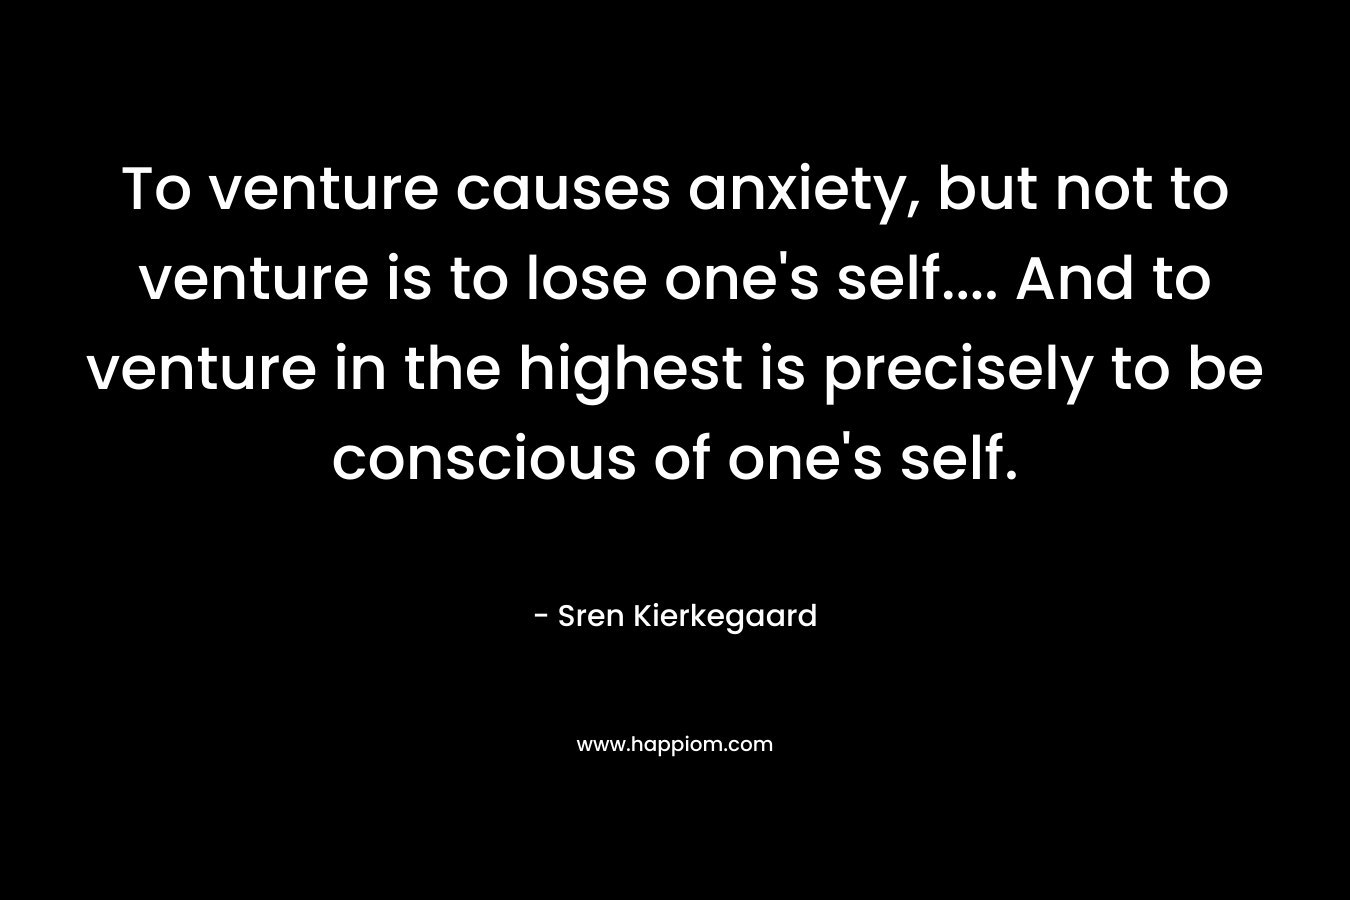 To venture causes anxiety, but not to venture is to lose one's self.... And to venture in the highest is precisely to be conscious of one's self.